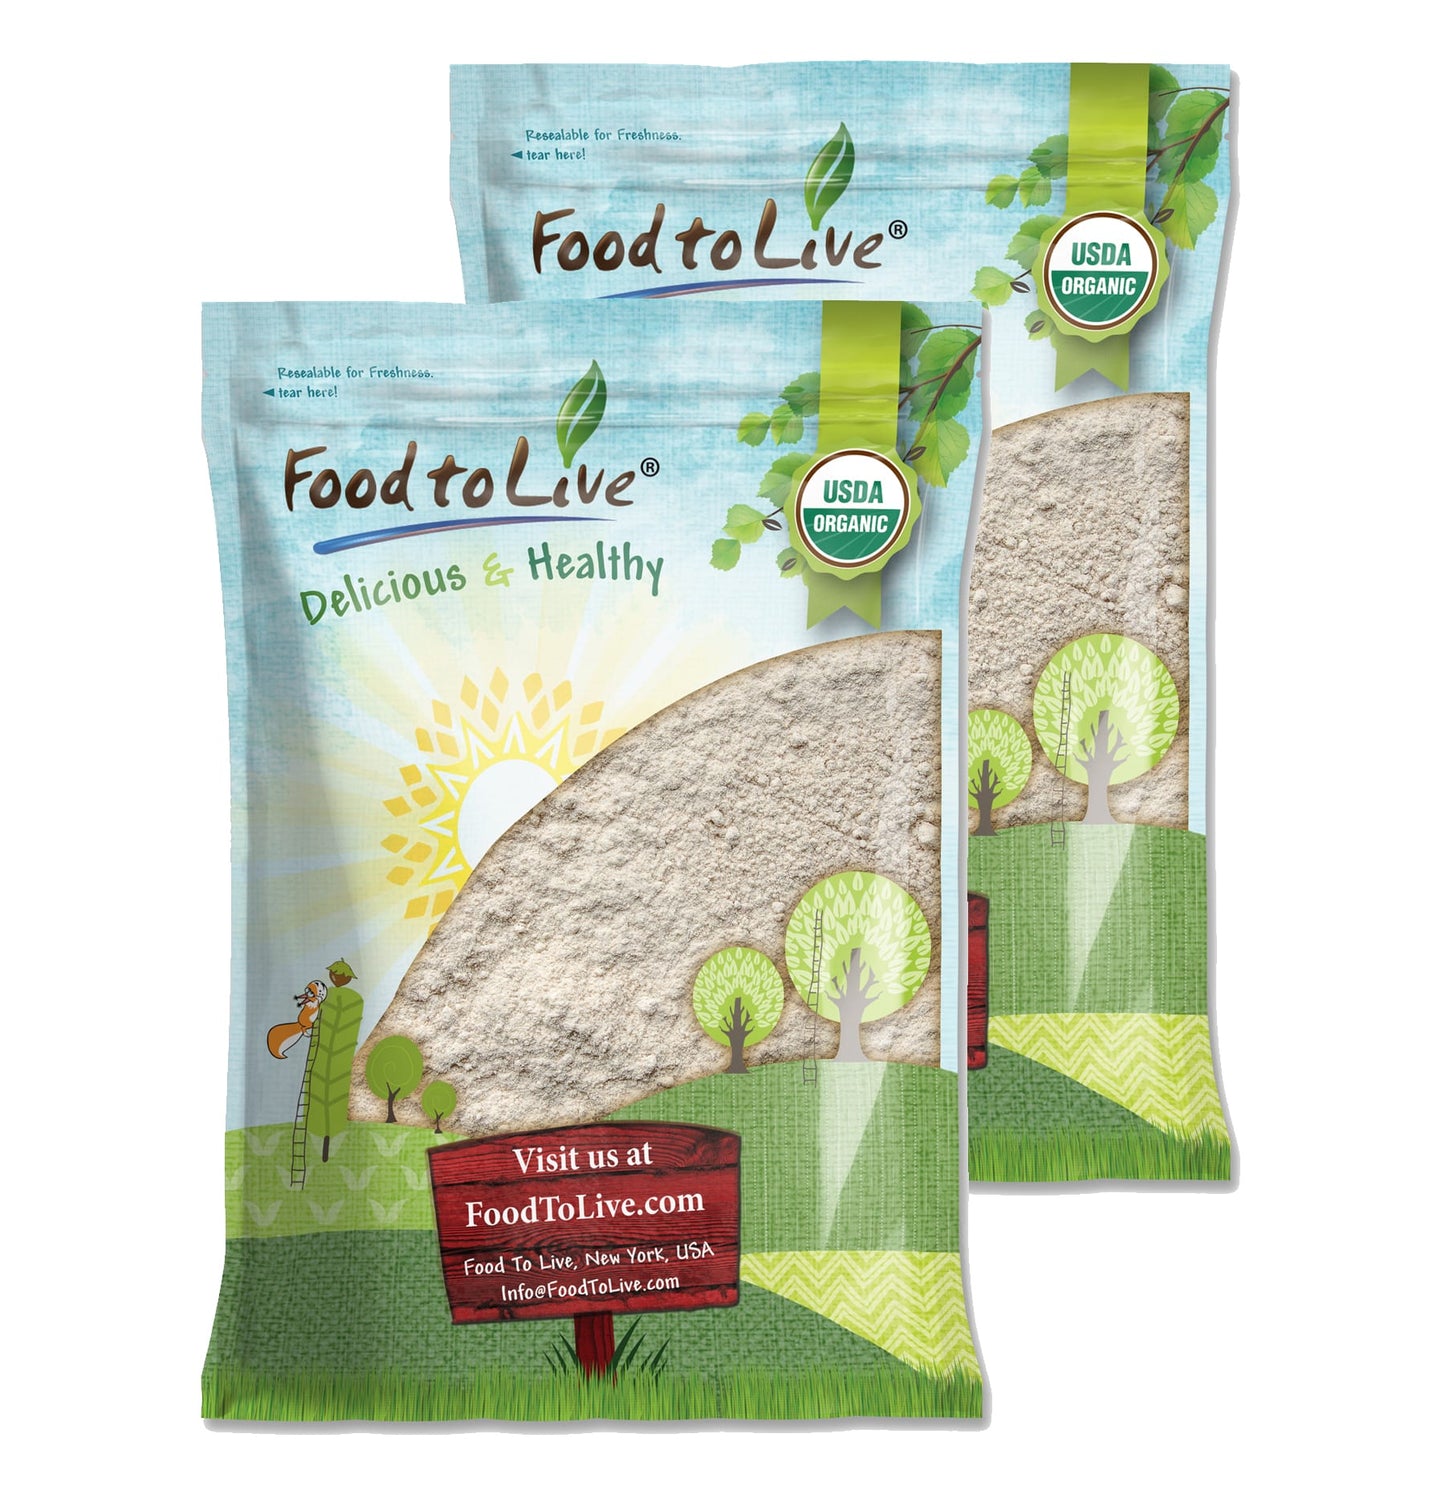 Gluten Free Organic Amaranth Flour – Non-GMO Whole Grain Flour, Vegan Fine Meal, Bulk Powder. High in Fiber, Protein. Great for Cooking, Baking, and as Thickener. Made in USA